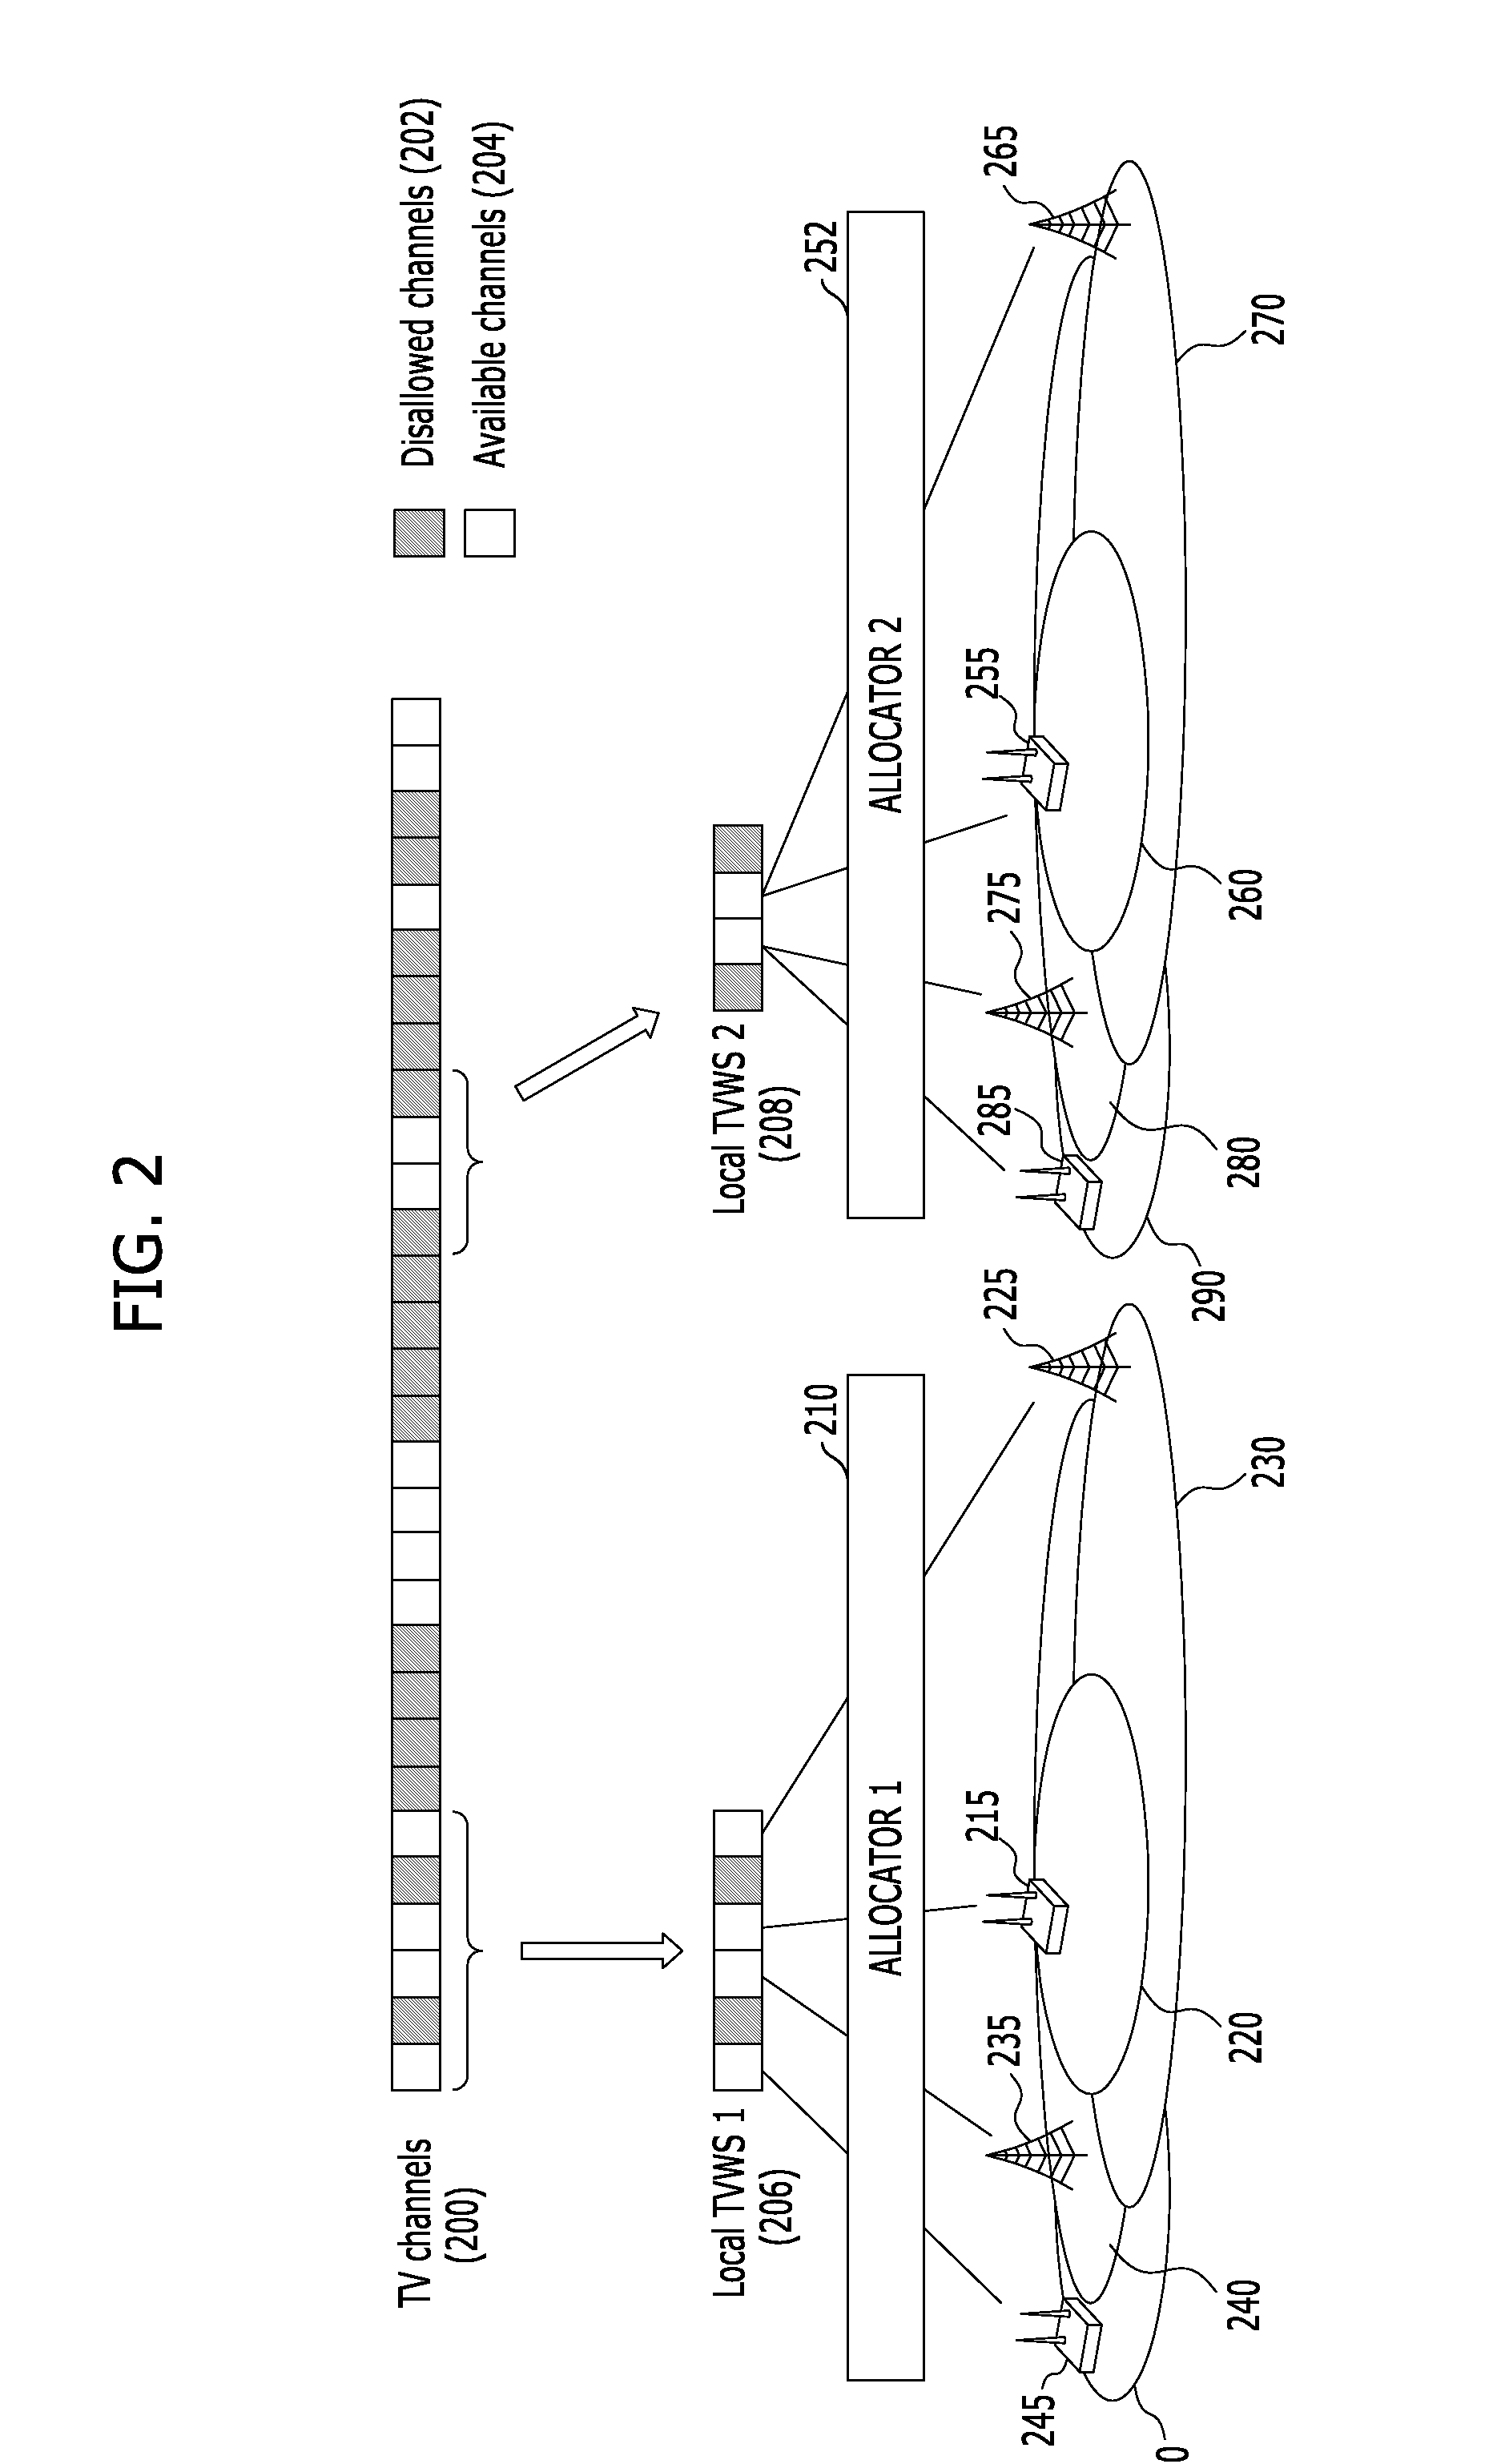 System and method for managing resources in a communication system